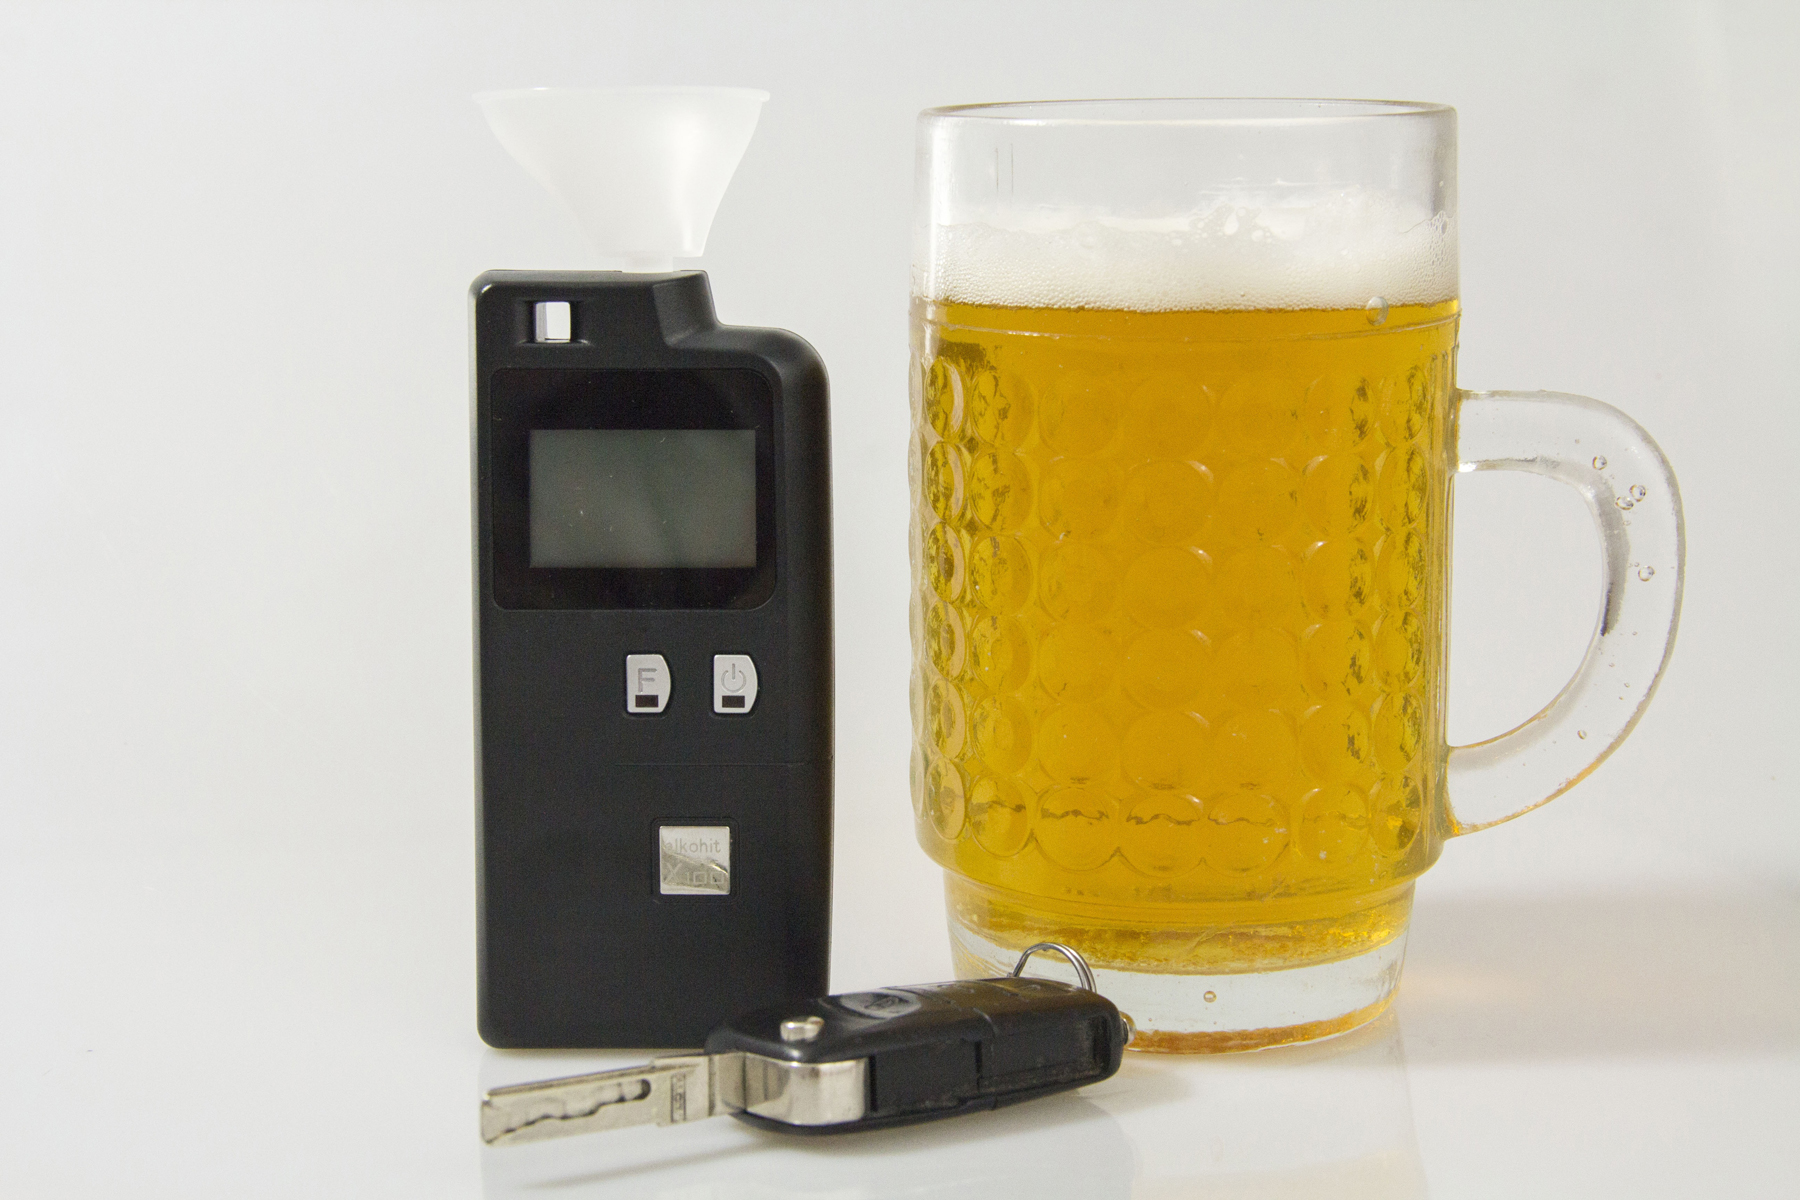 A breathalyser next to a car key and a pint of beer